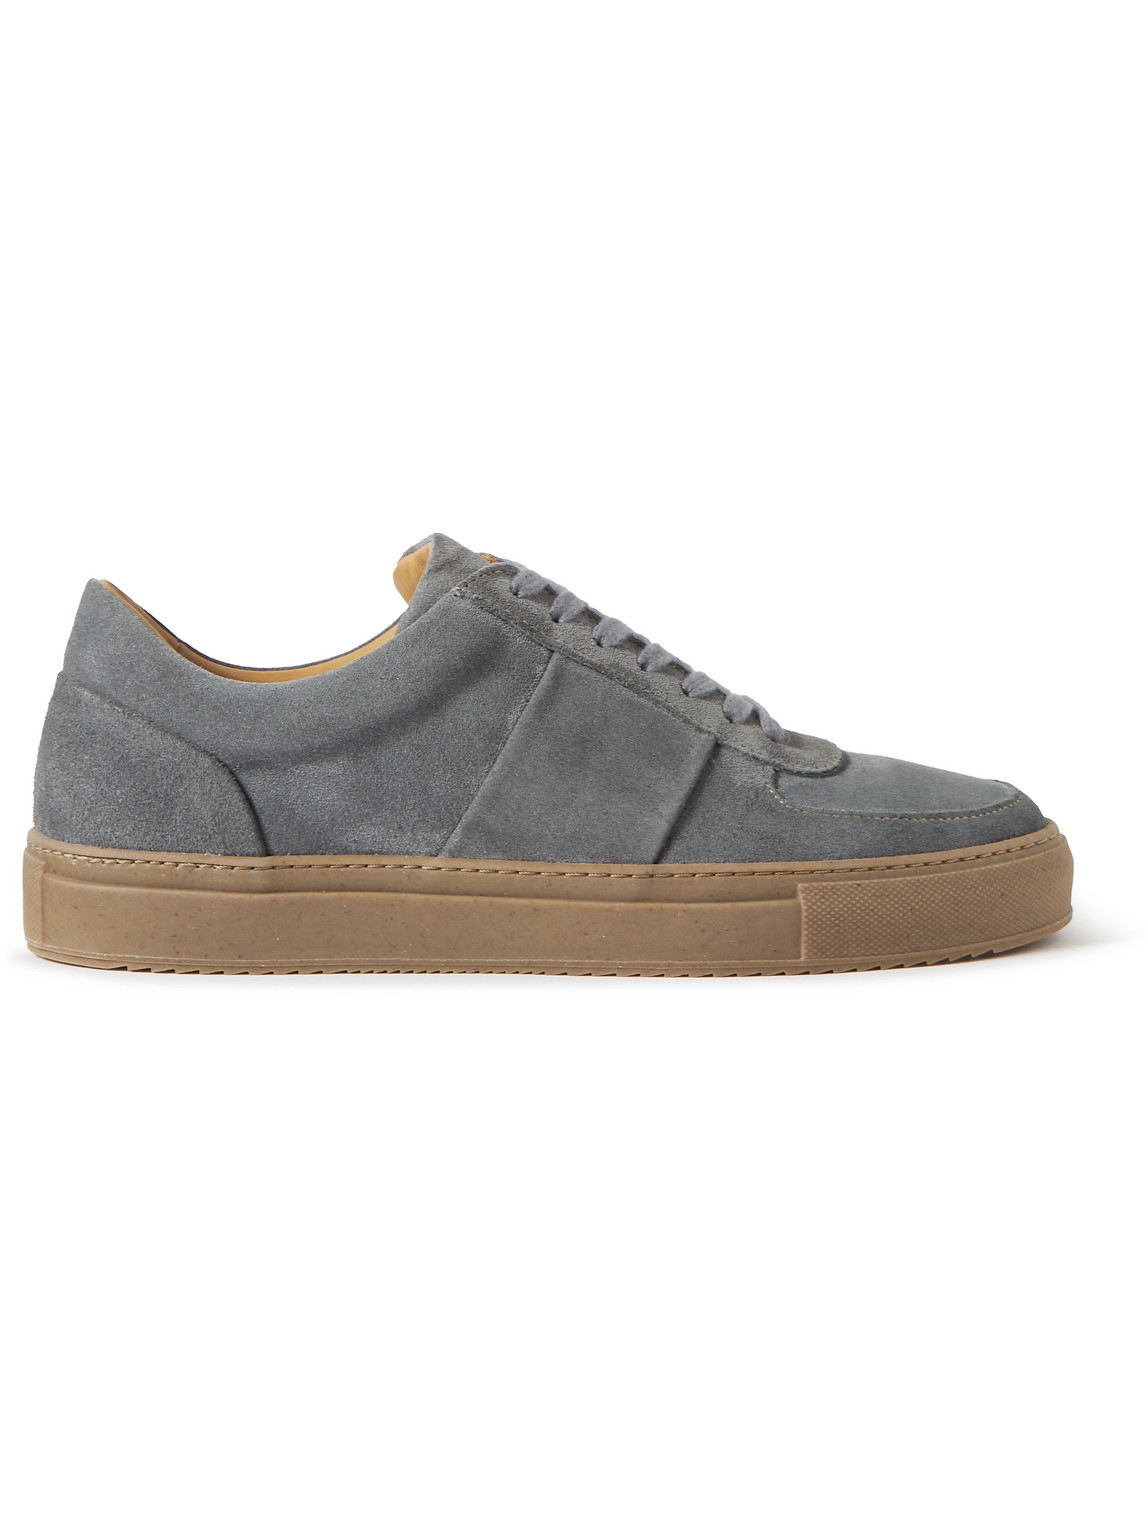 Mr P Larry Regenerated Suede By Evolo® Sneakers In Gray